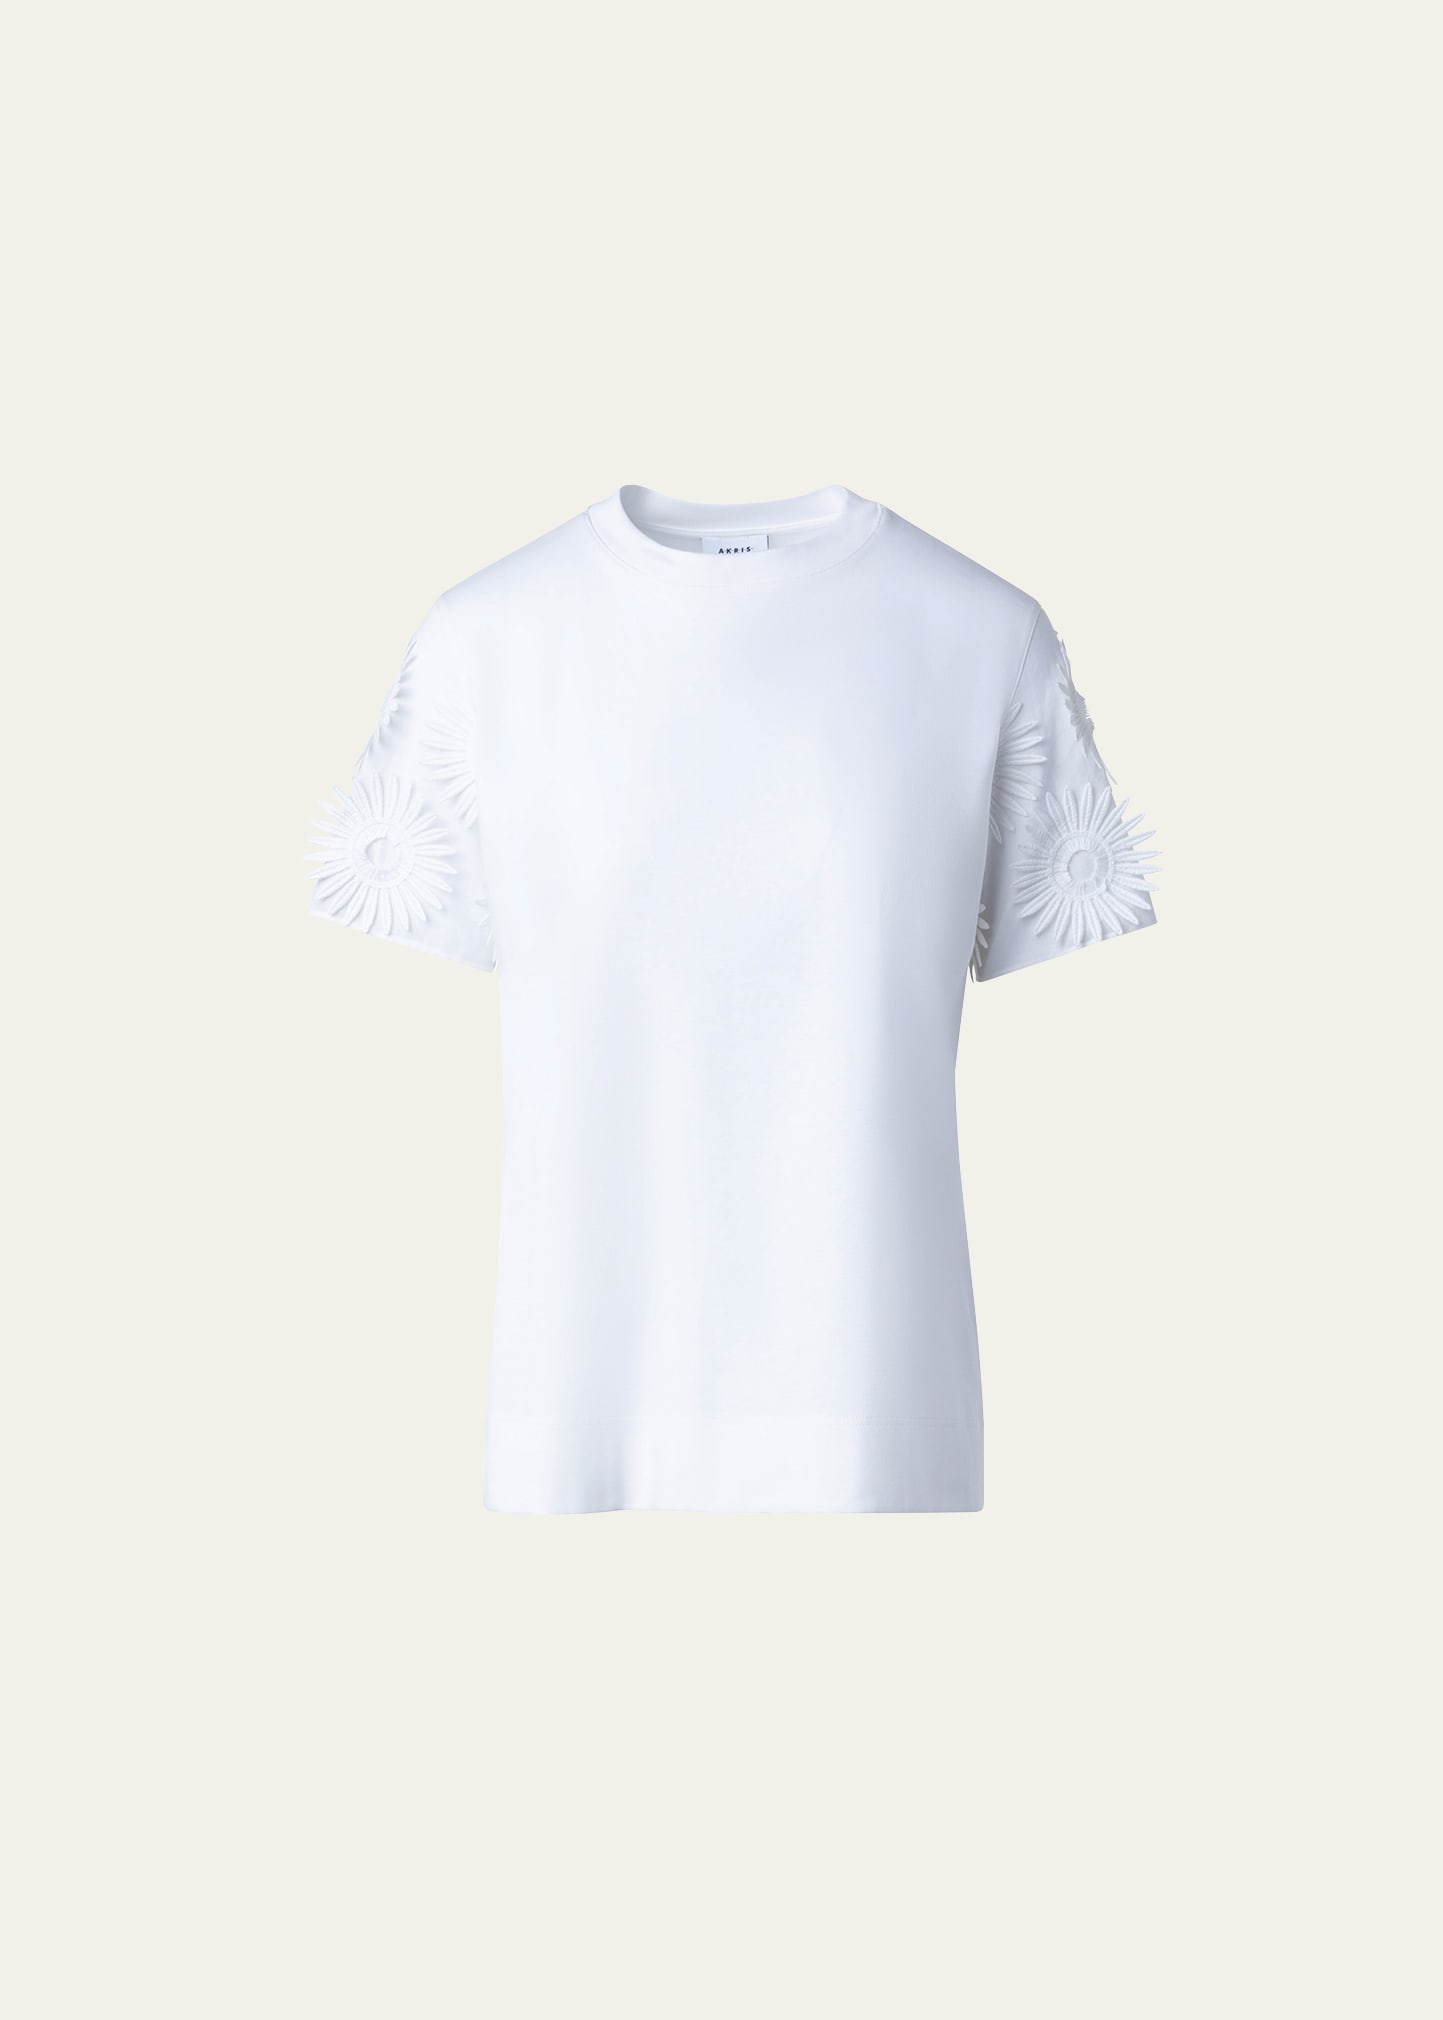 AKRIS PUNTO HELLO SUNSHINE COTTON JERSEY T-SHIRT WITH SUPERPOSE EMBROIDERY